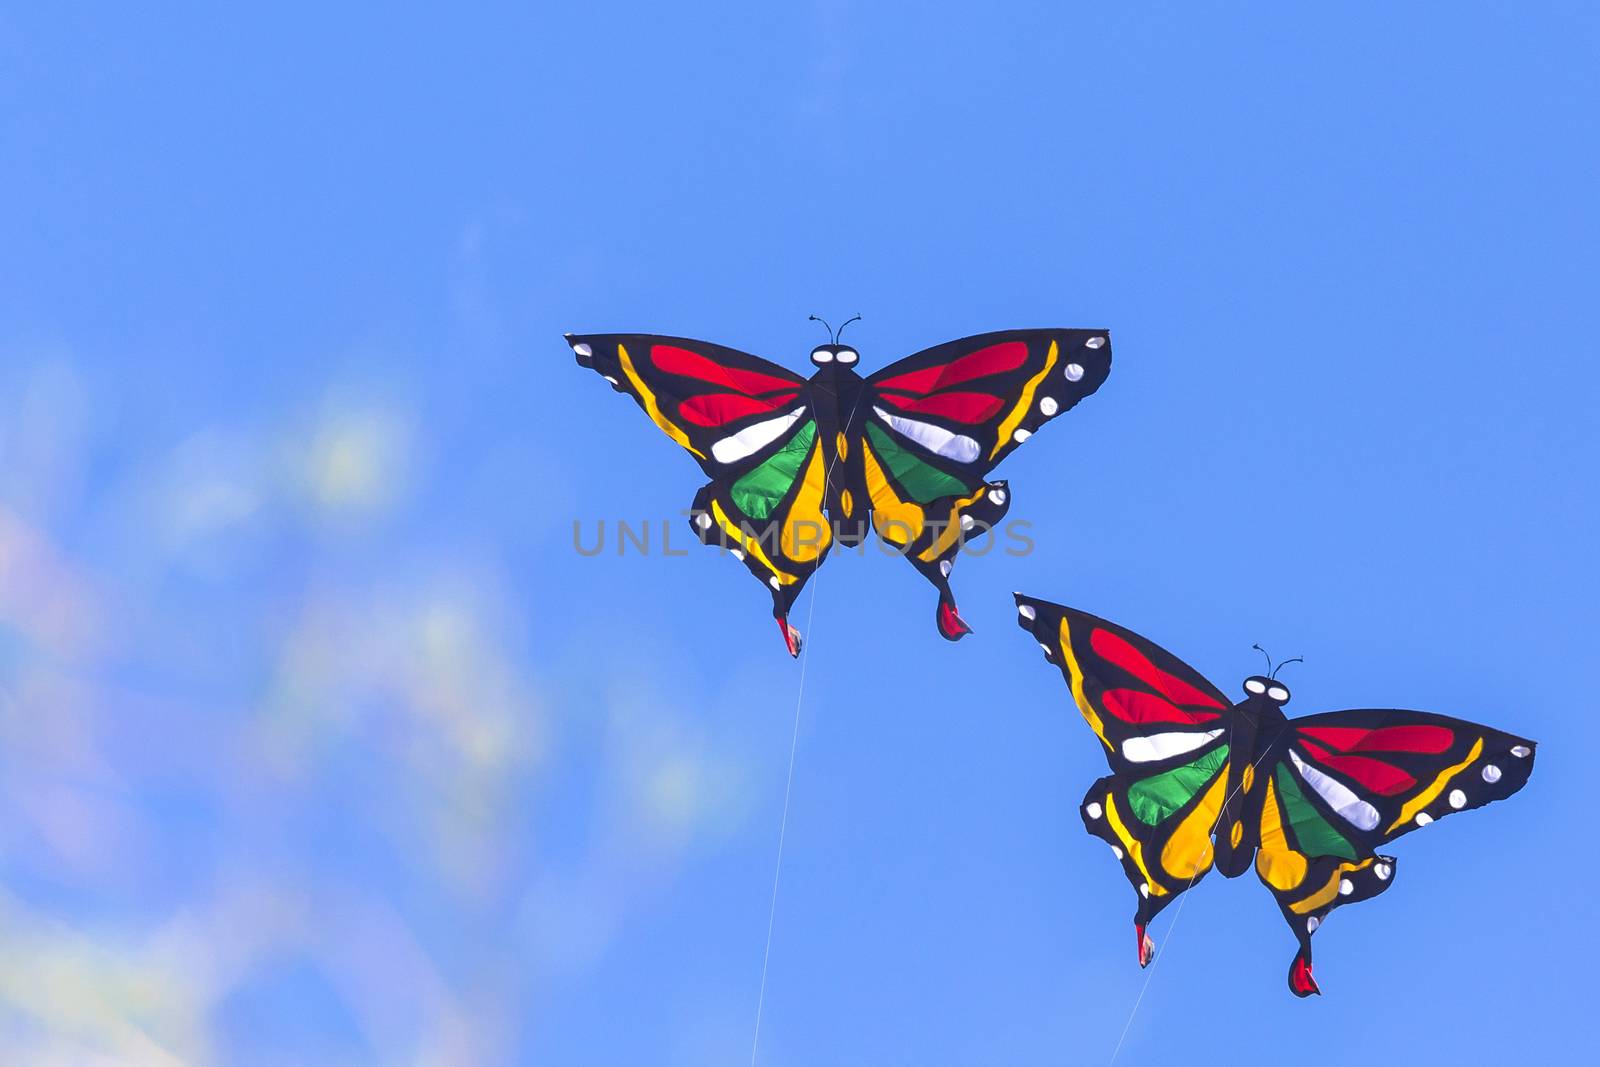 Colorful Kites Butterfly Flying in Blue Sky.